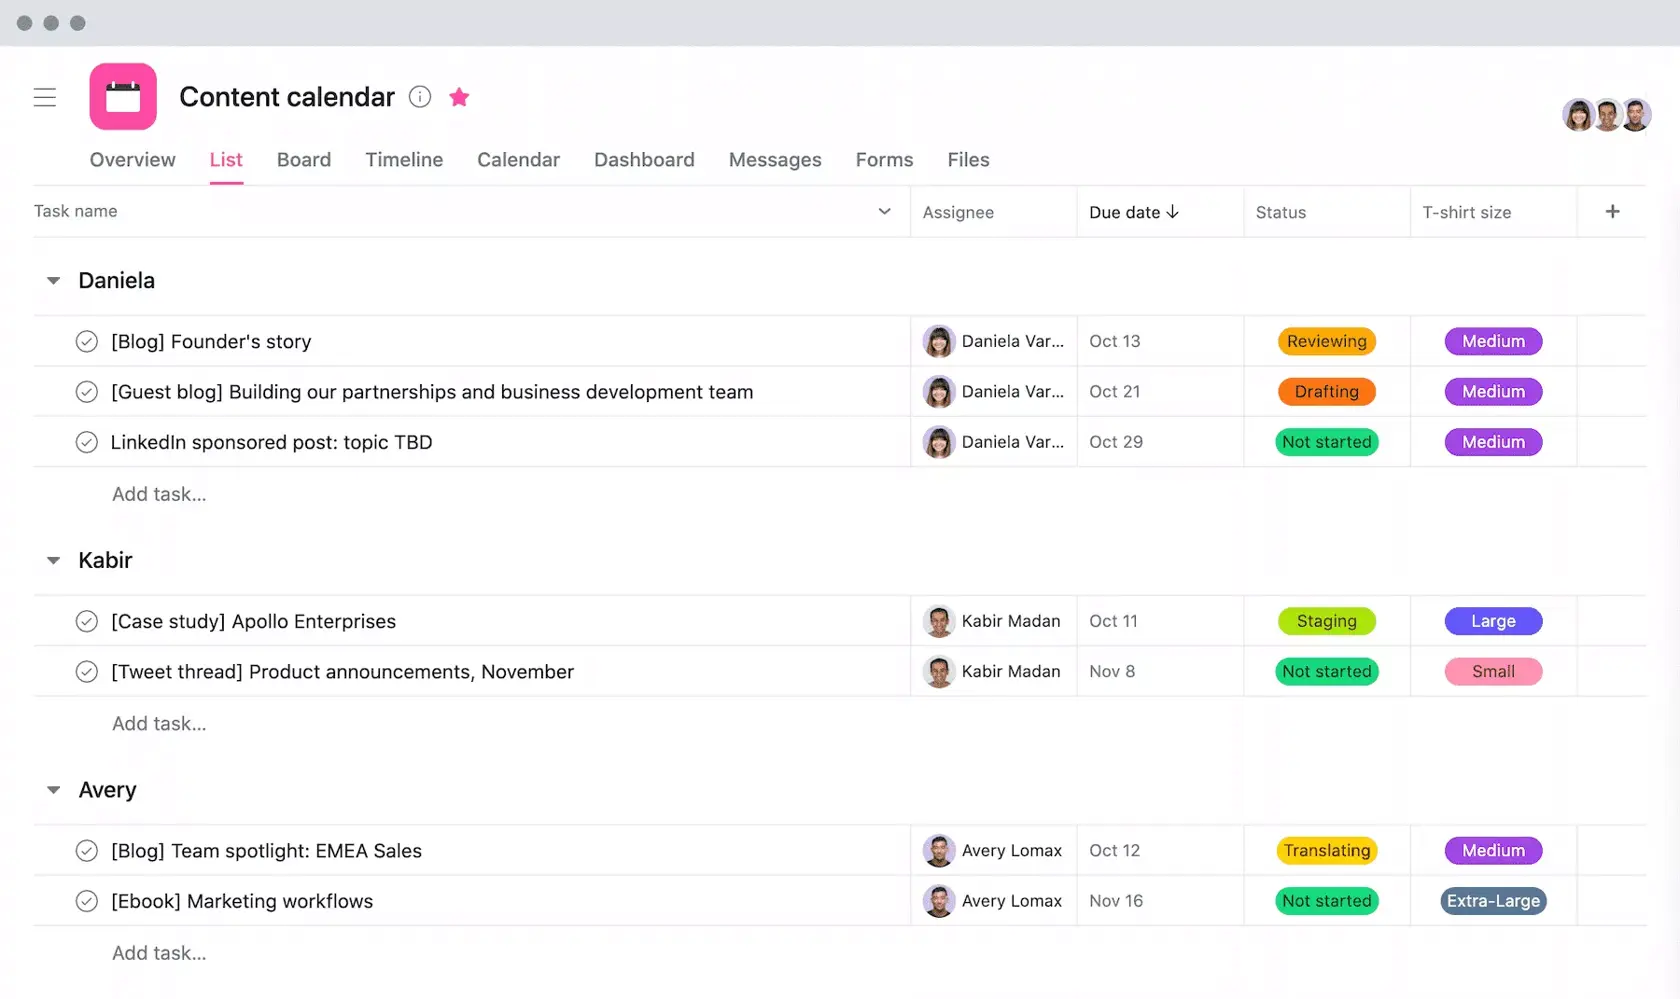 [Old Product UI] Content calendar project with t-shirt sizing in Asana (lists)